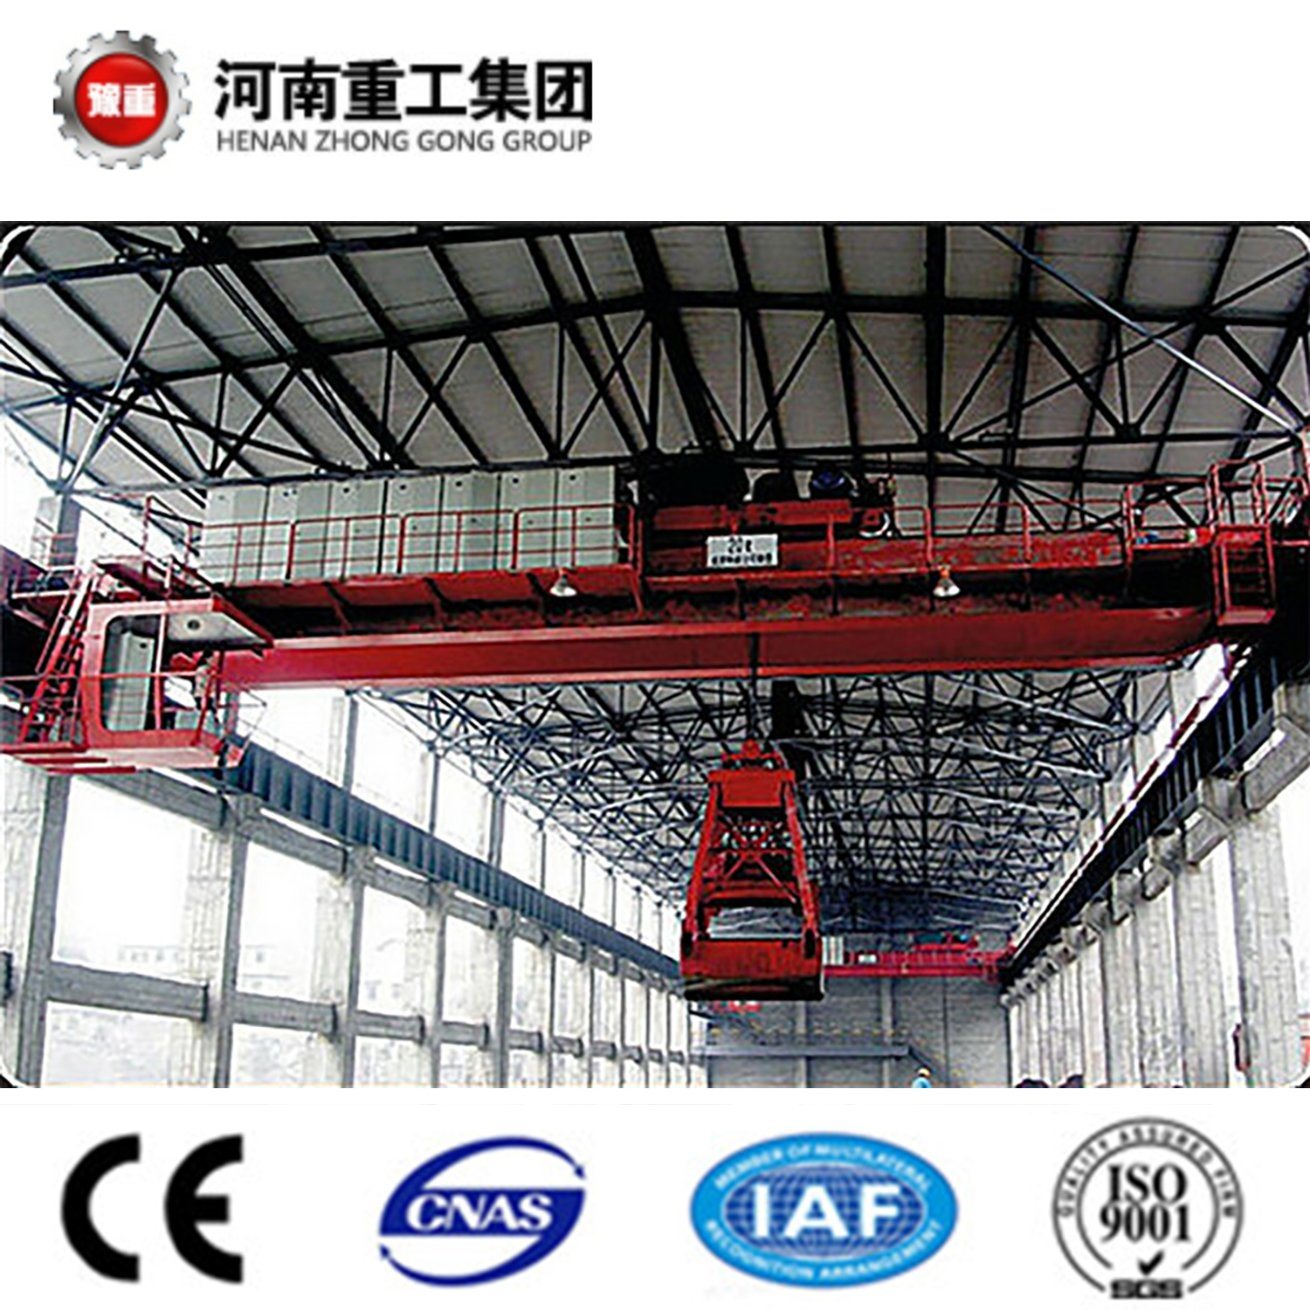 
                A6 Working Class Double Girder Overhead Crane with Mechanical/Electric Hydraulic Grab for Wast/Coal Grabbing
            